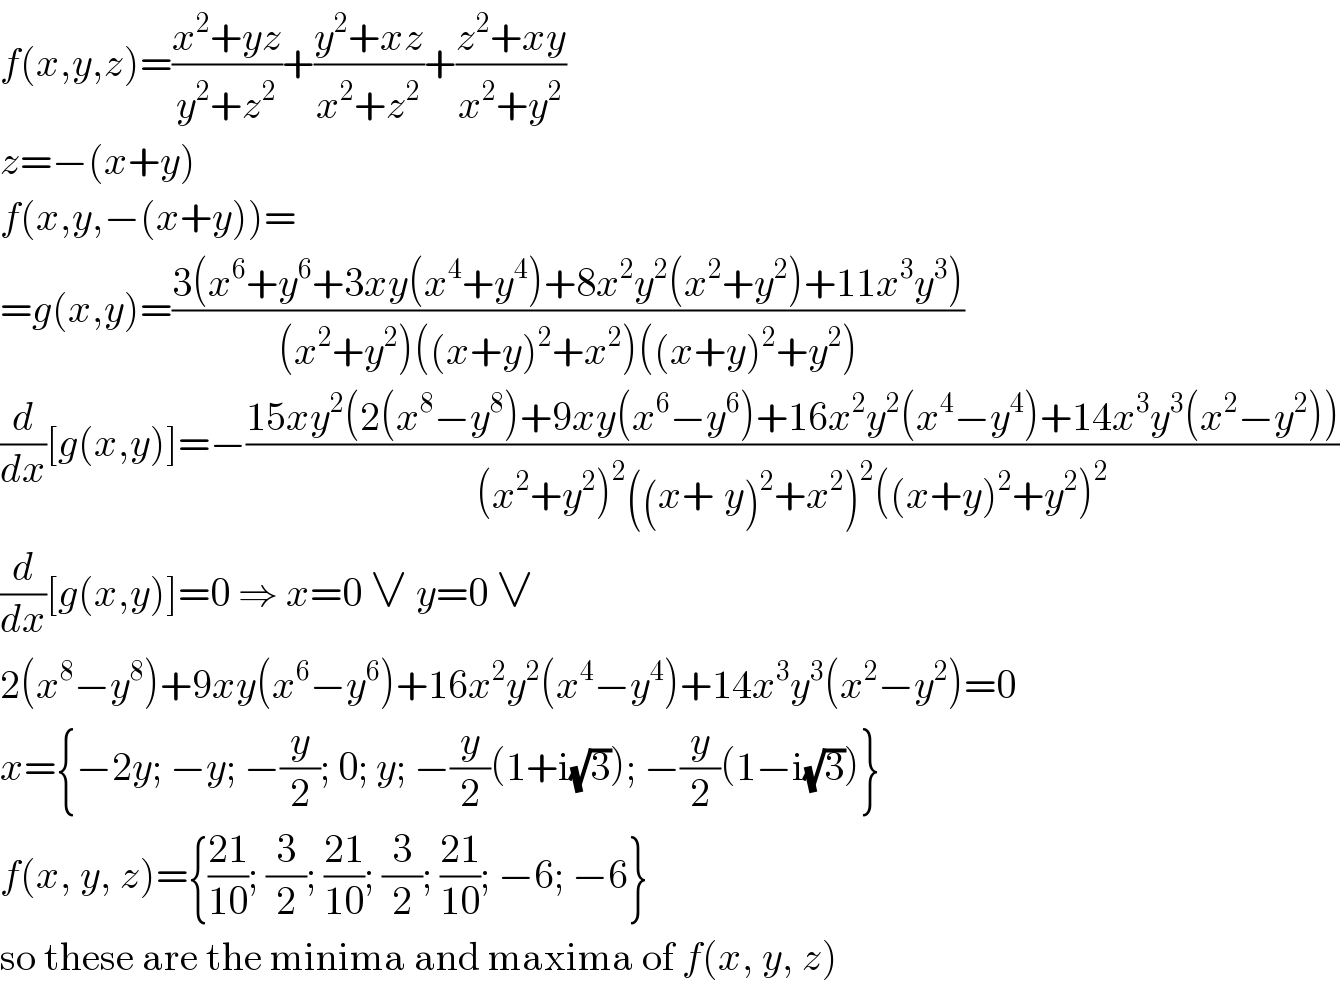 f(x,y,z)=((x^2 +yz)/(y^2 +z^2 ))+((y^2 +xz)/(x^2 +z^2 ))+((z^2 +xy)/(x^2 +y^2 ))  z=−(x+y)  f(x,y,−(x+y))=  =g(x,y)=((3(x^6 +y^6 +3xy(x^4 +y^4 )+8x^2 y^2 (x^2 +y^2 )+11x^3 y^3 ))/((x^2 +y^2 )((x+y)^2 +x^2 )((x+y)^2 +y^2 )))  (d/dx)[g(x,y)]=−((15xy^2 (2(x^8 −y^8 )+9xy(x^6 −y^6 )+16x^2 y^2 (x^4 −y^4 )+14x^3 y^3 (x^2 −y^2 )))/((x^2 +y^2 )^2 ((x+_ y)^2 +x^2 )^2 ((x+y)^2 +y^2 )^2 ))  (d/dx)[g(x,y)]=0 ⇒ x=0 ∨ y=0 ∨  2(x^8 −y^8 )+9xy(x^6 −y^6 )+16x^2 y^2 (x^4 −y^4 )+14x^3 y^3 (x^2 −y^2 )=0  x={−2y; −y; −(y/2); 0; y; −(y/2)(1+i(√3)); −(y/2)(1−i(√3))}  f(x, y, z)={((21)/(10)); (3/2); ((21)/(10)); (3/2); ((21)/(10)); −6; −6}  so these are the minima and maxima of f(x, y, z)  